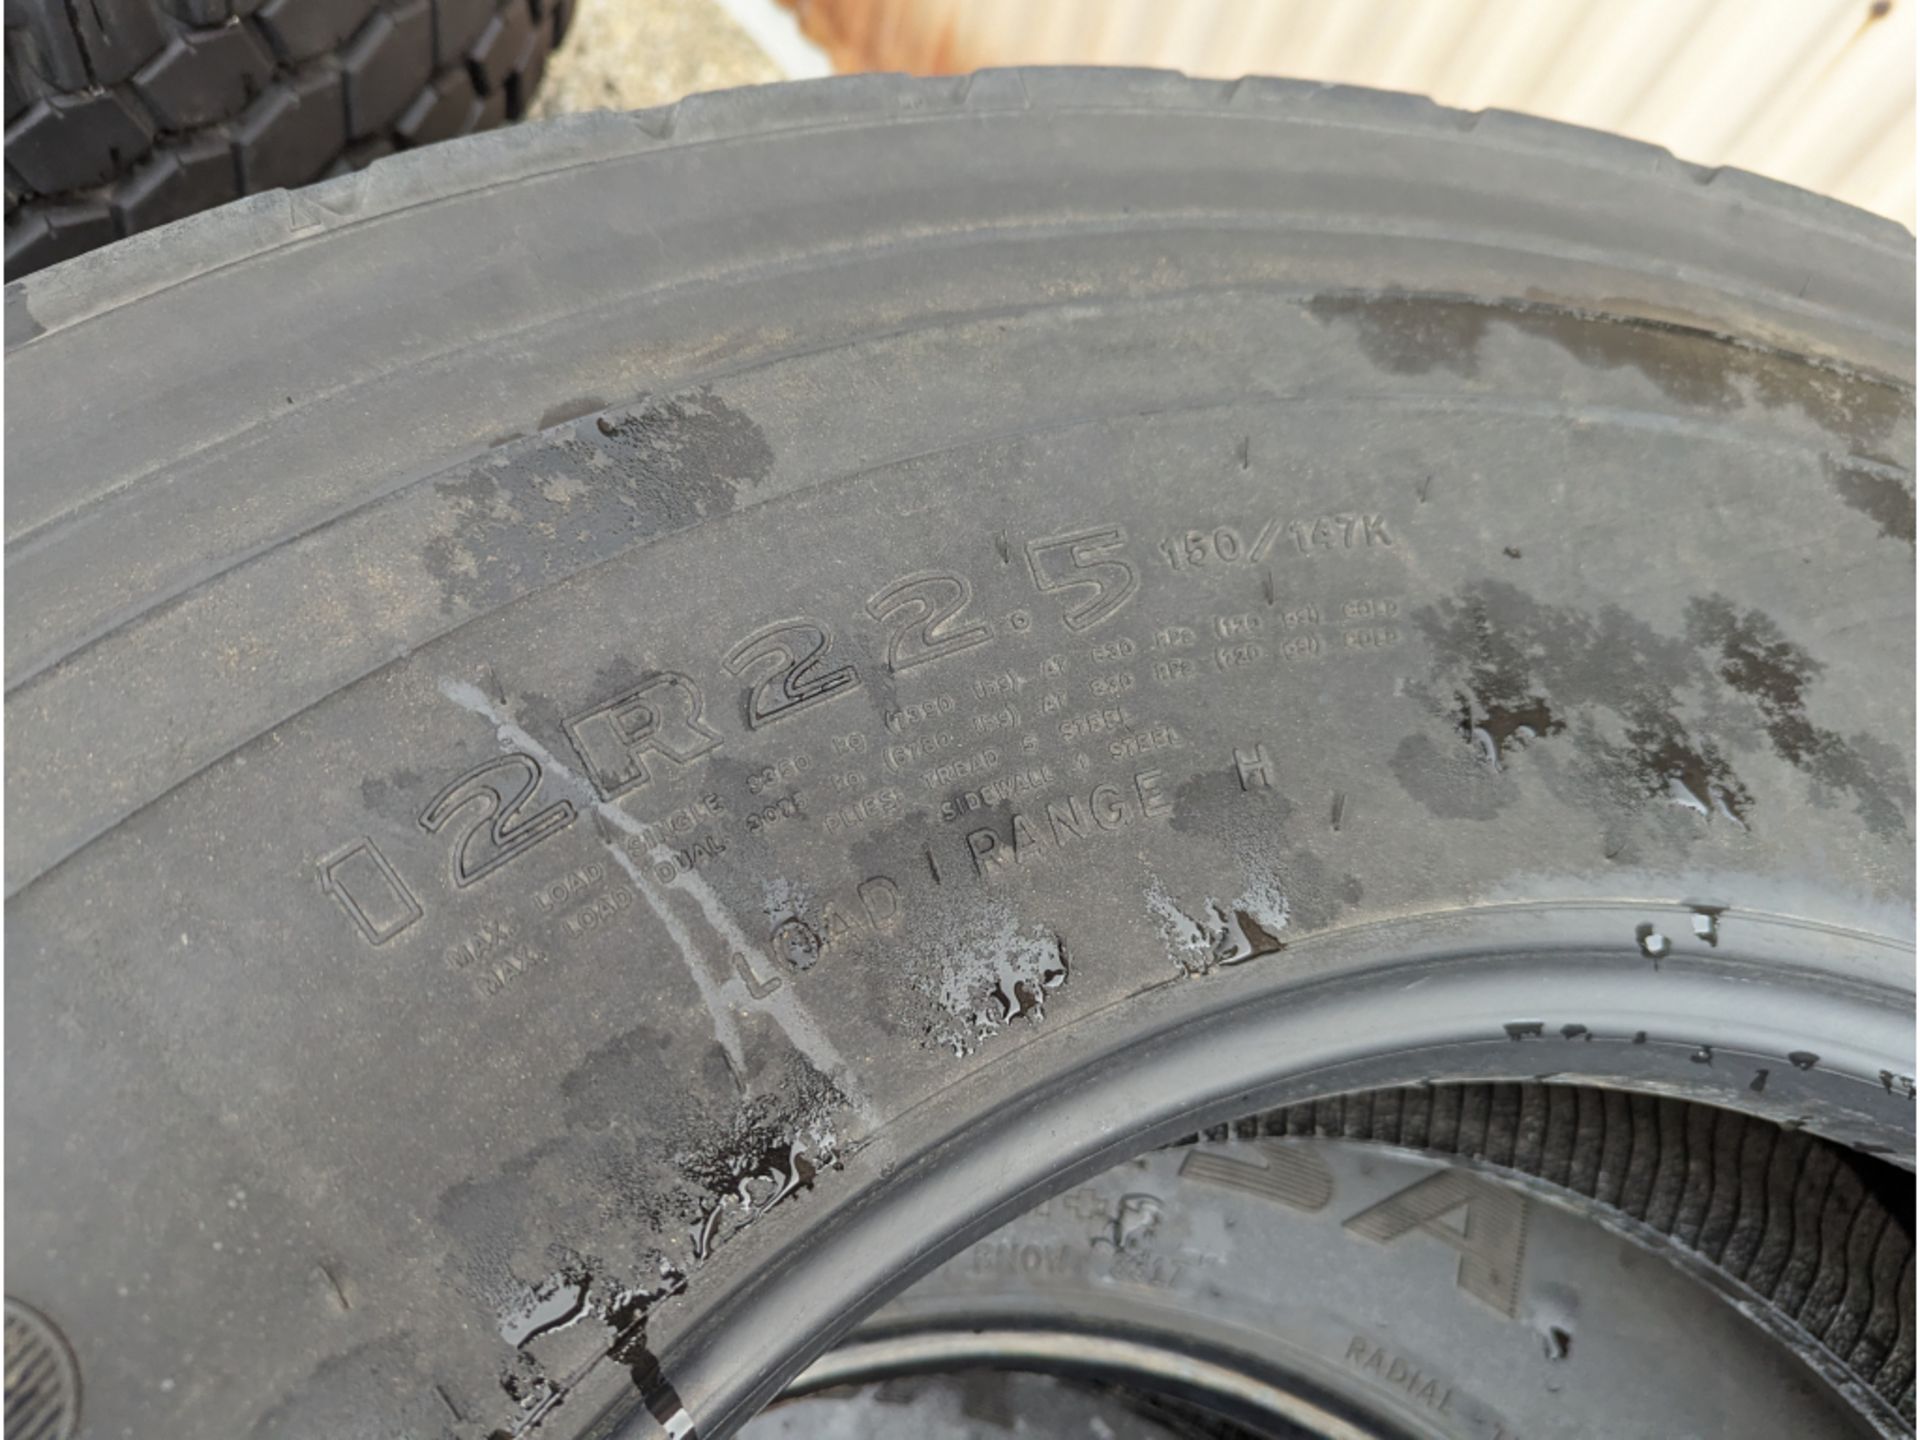 4 Goodyear G751 MSA 12R22.5 commercial truck tires USED Virgin Tread Surplus Take Off - Image 4 of 5